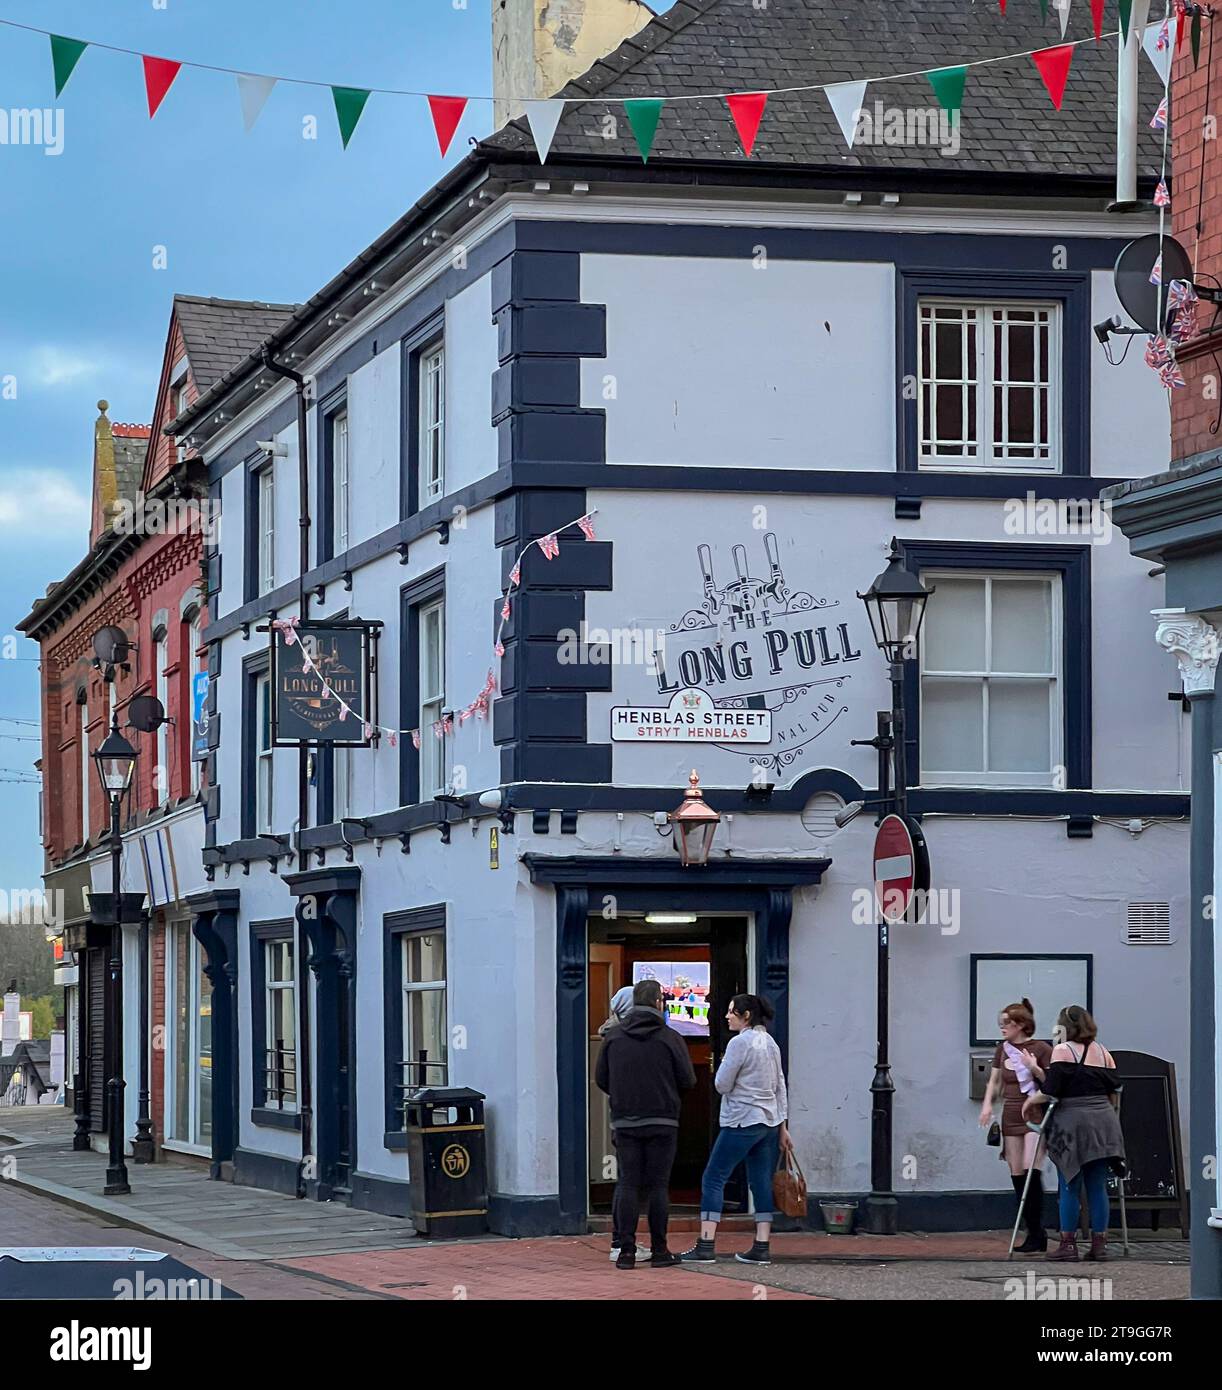 The Long Pull public house in the city of Wrexham, North Wales, UK Stock Photo